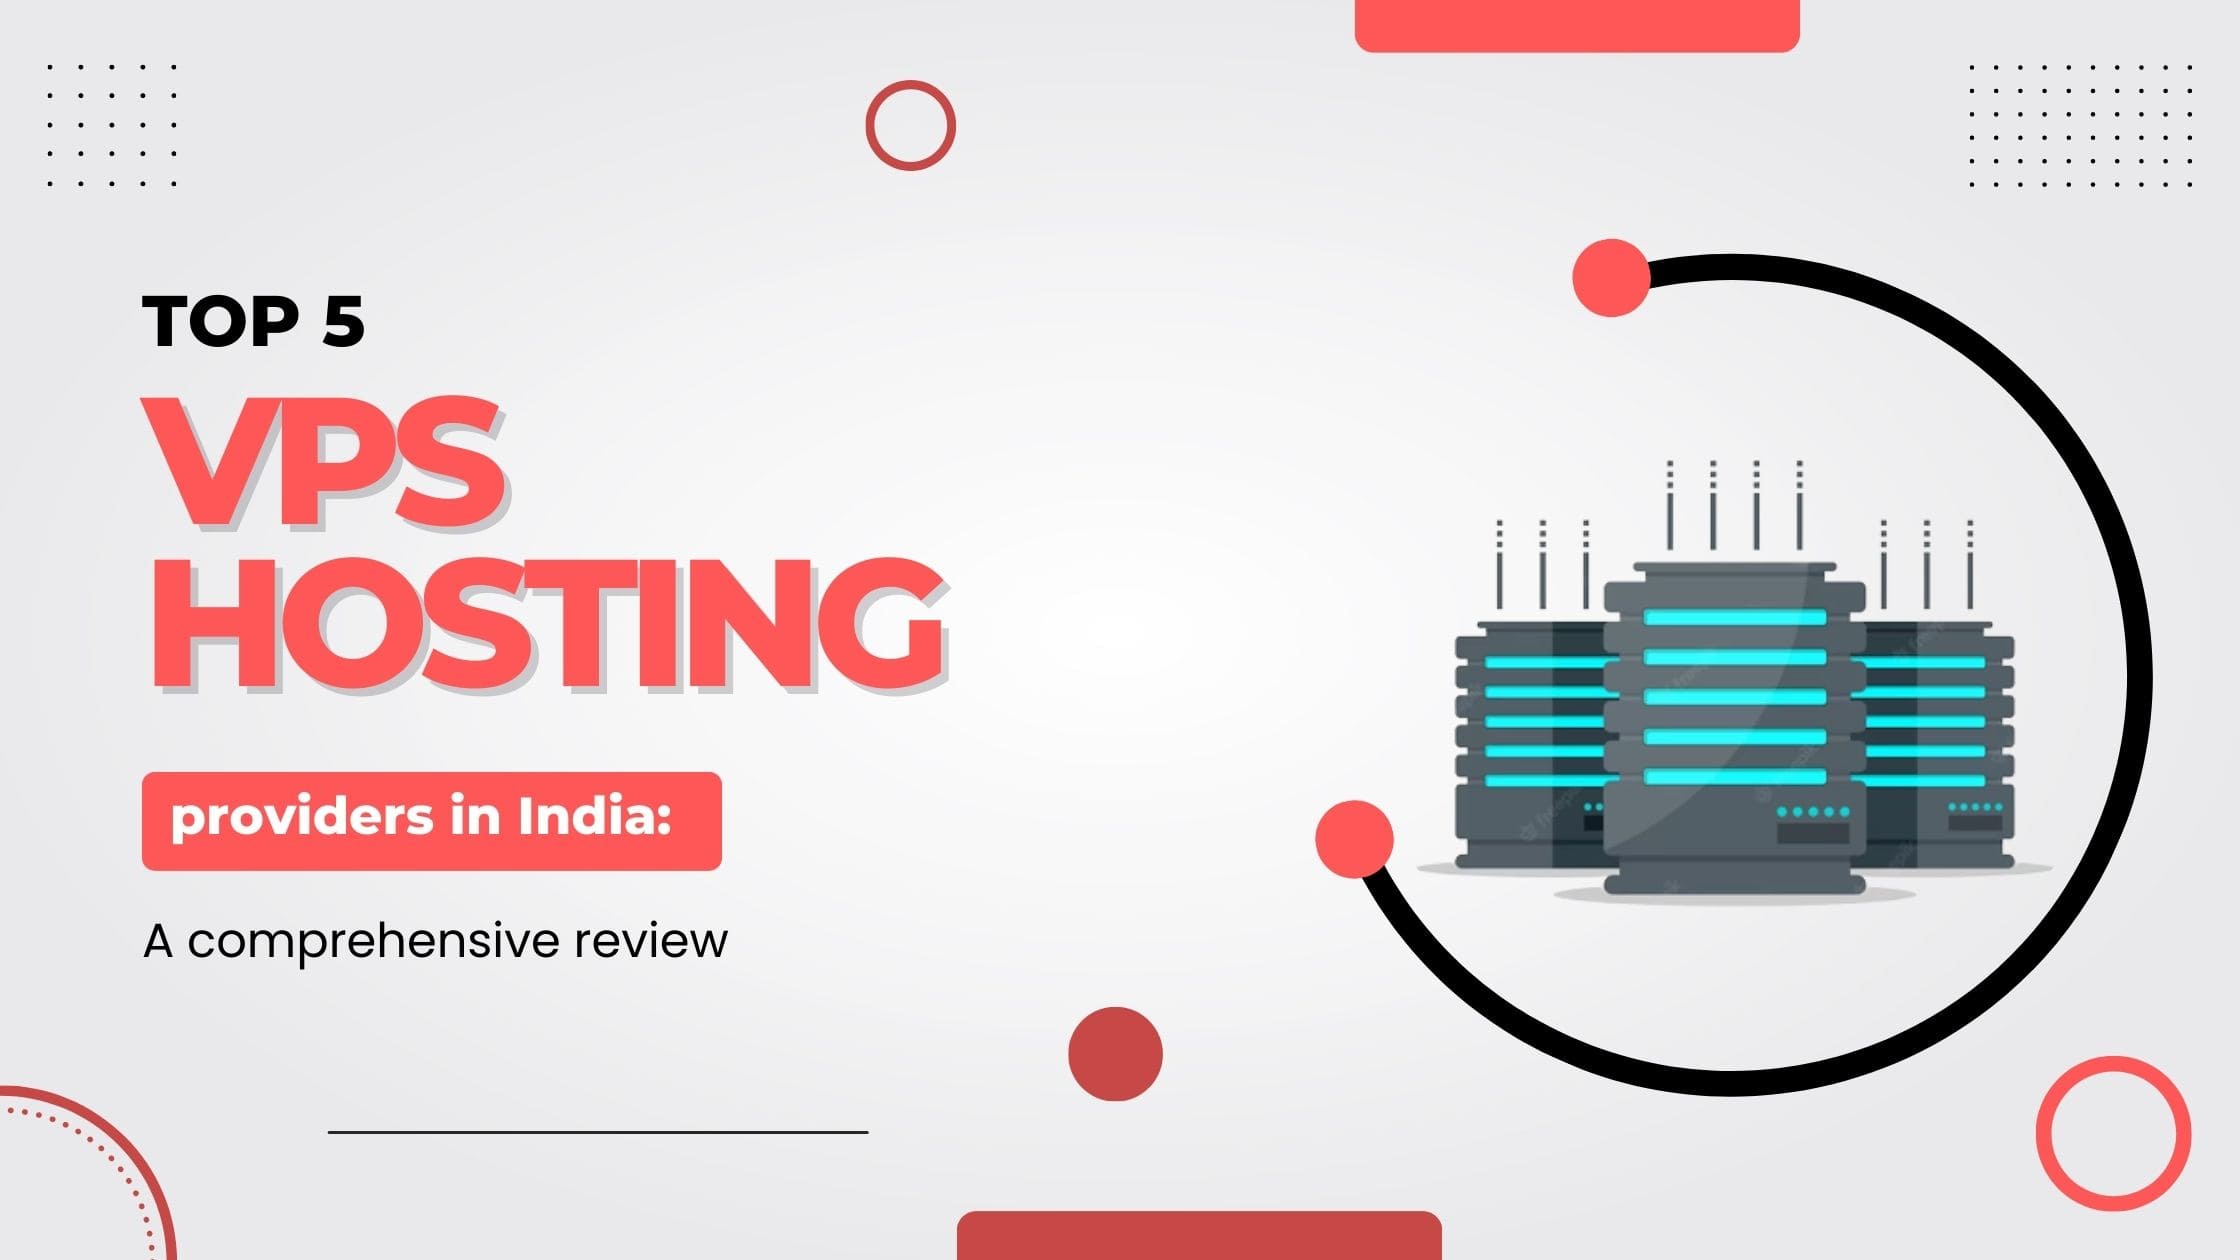 Top 5 VPS hosting providers in India: A comprehensive review